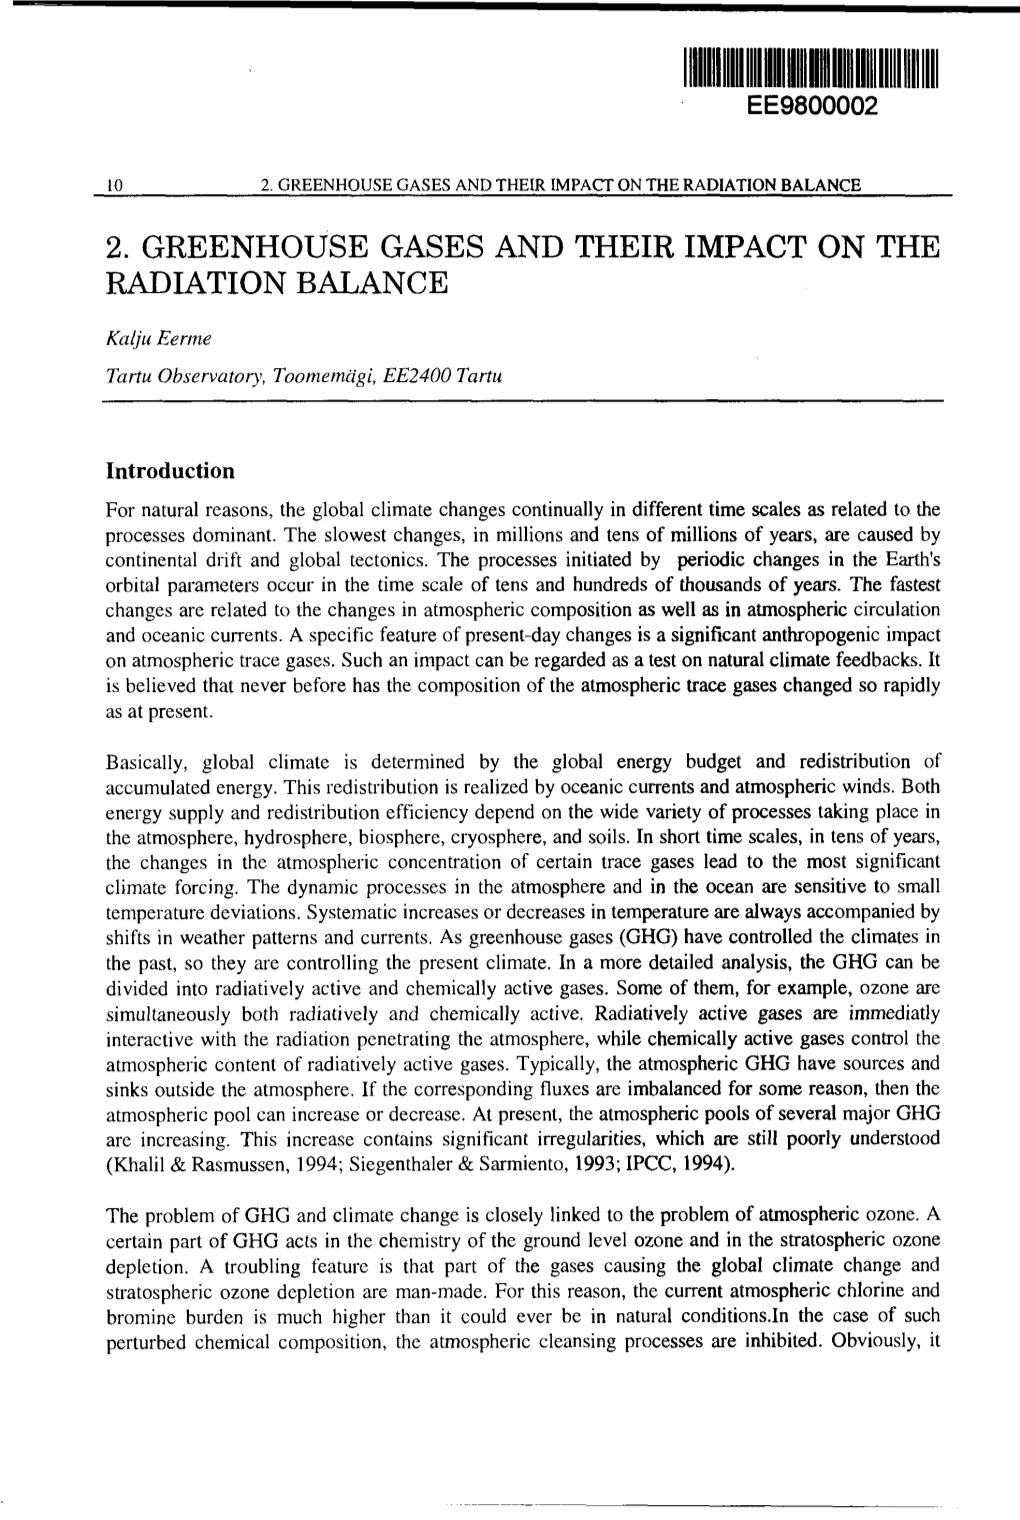 Greenhouse Gases and Their Impact on the Radiation Balance 2